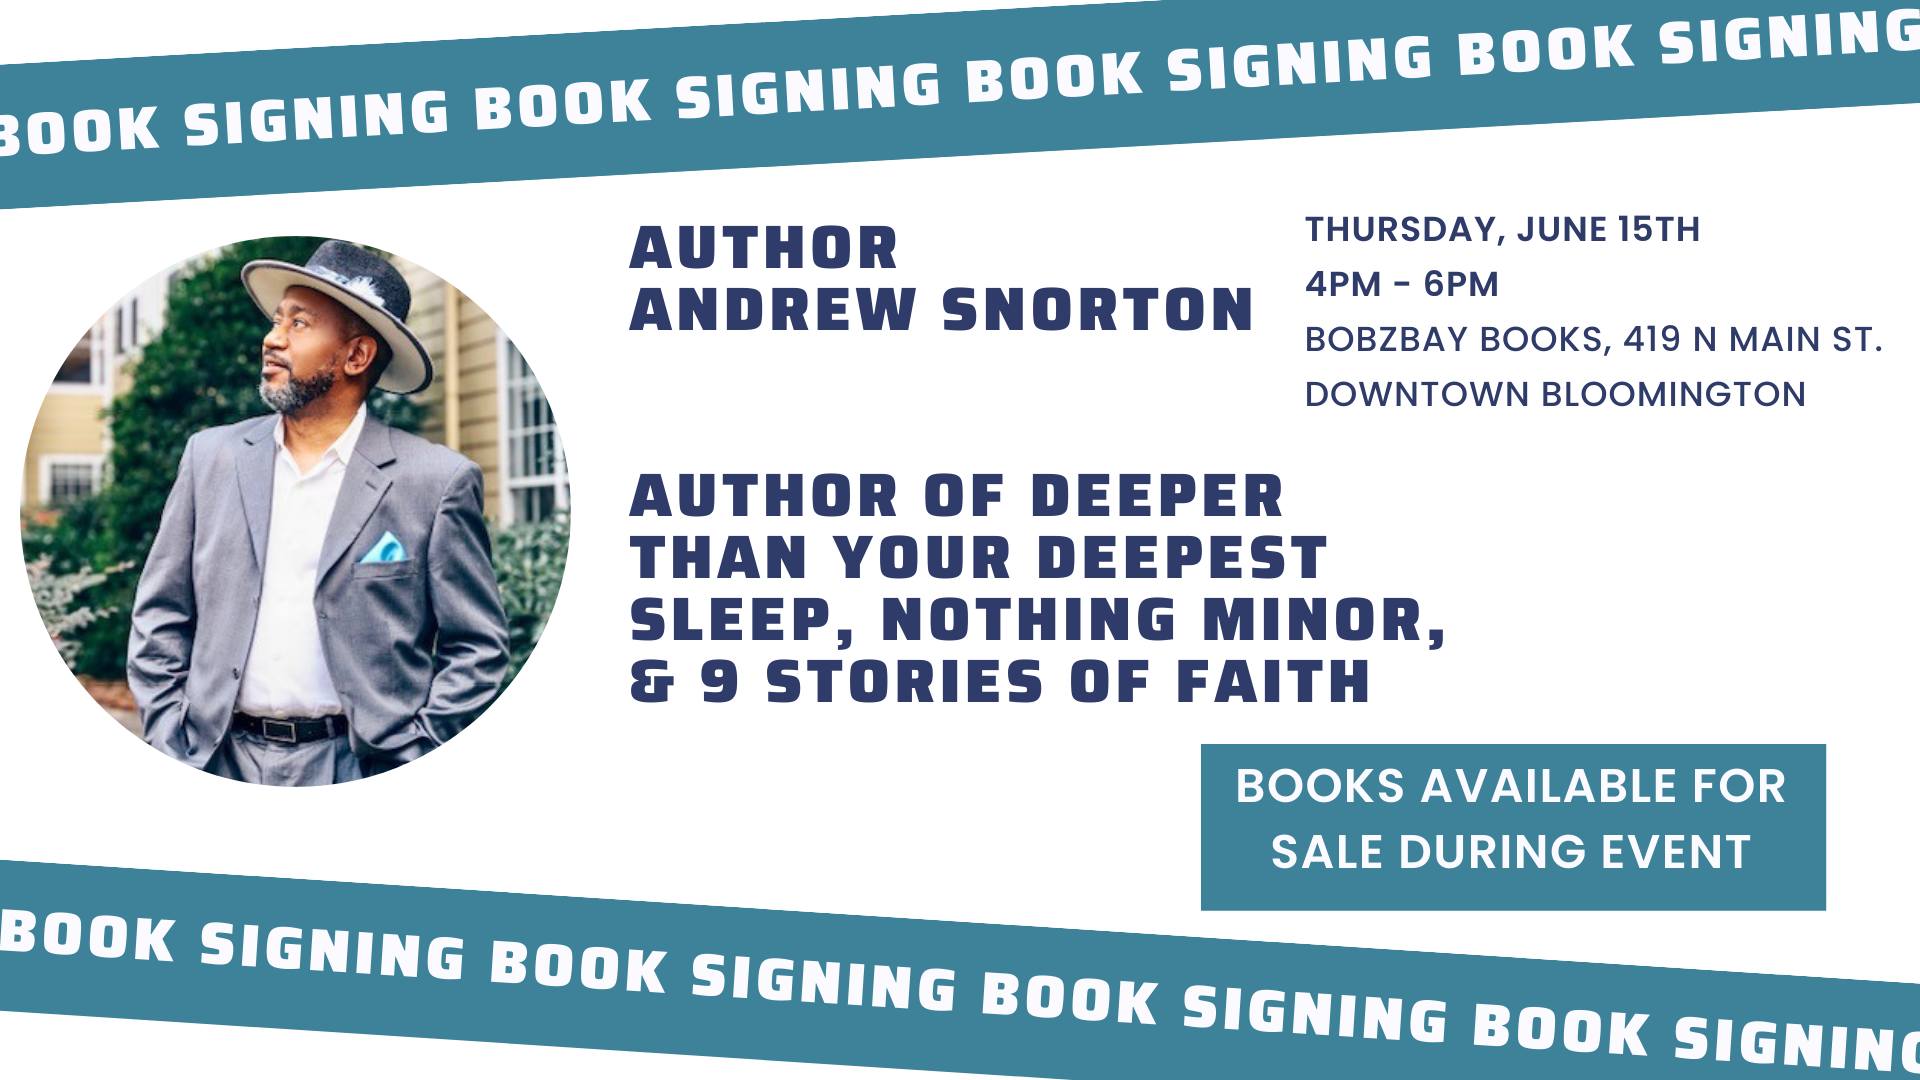 Author Andrew Snorton Book Signing at Bobzbay Books